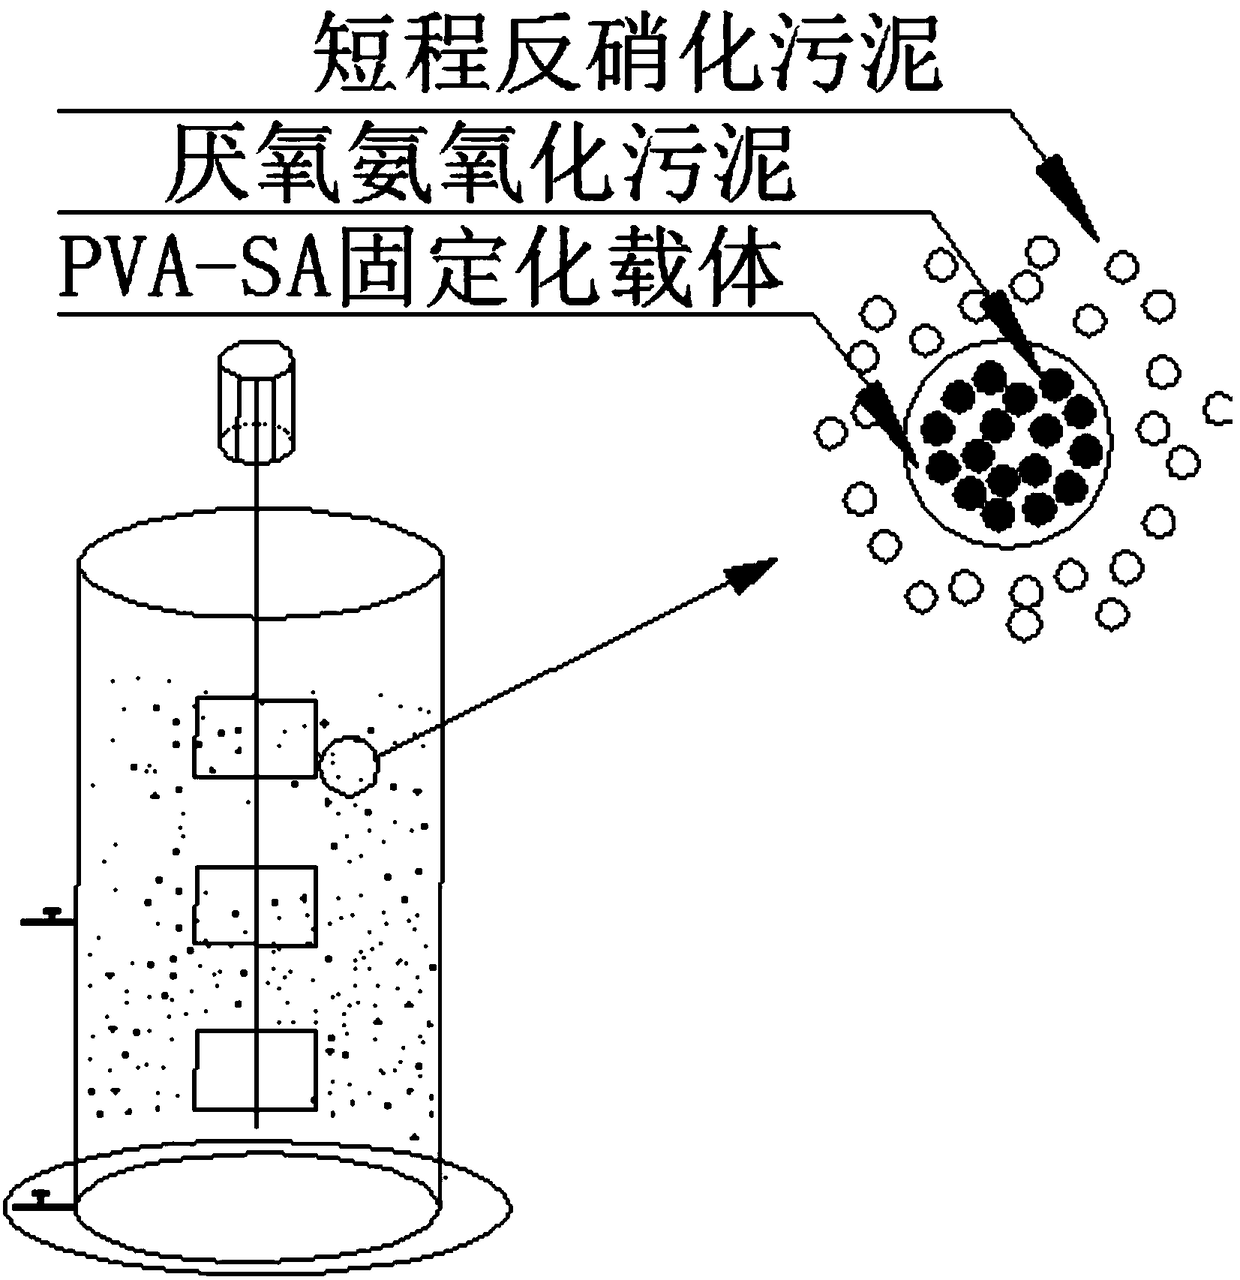 A method for immobilized anaerobic ammonium oxidation coupled with short-range denitrification to treat urban sewage and nitrate wastewater